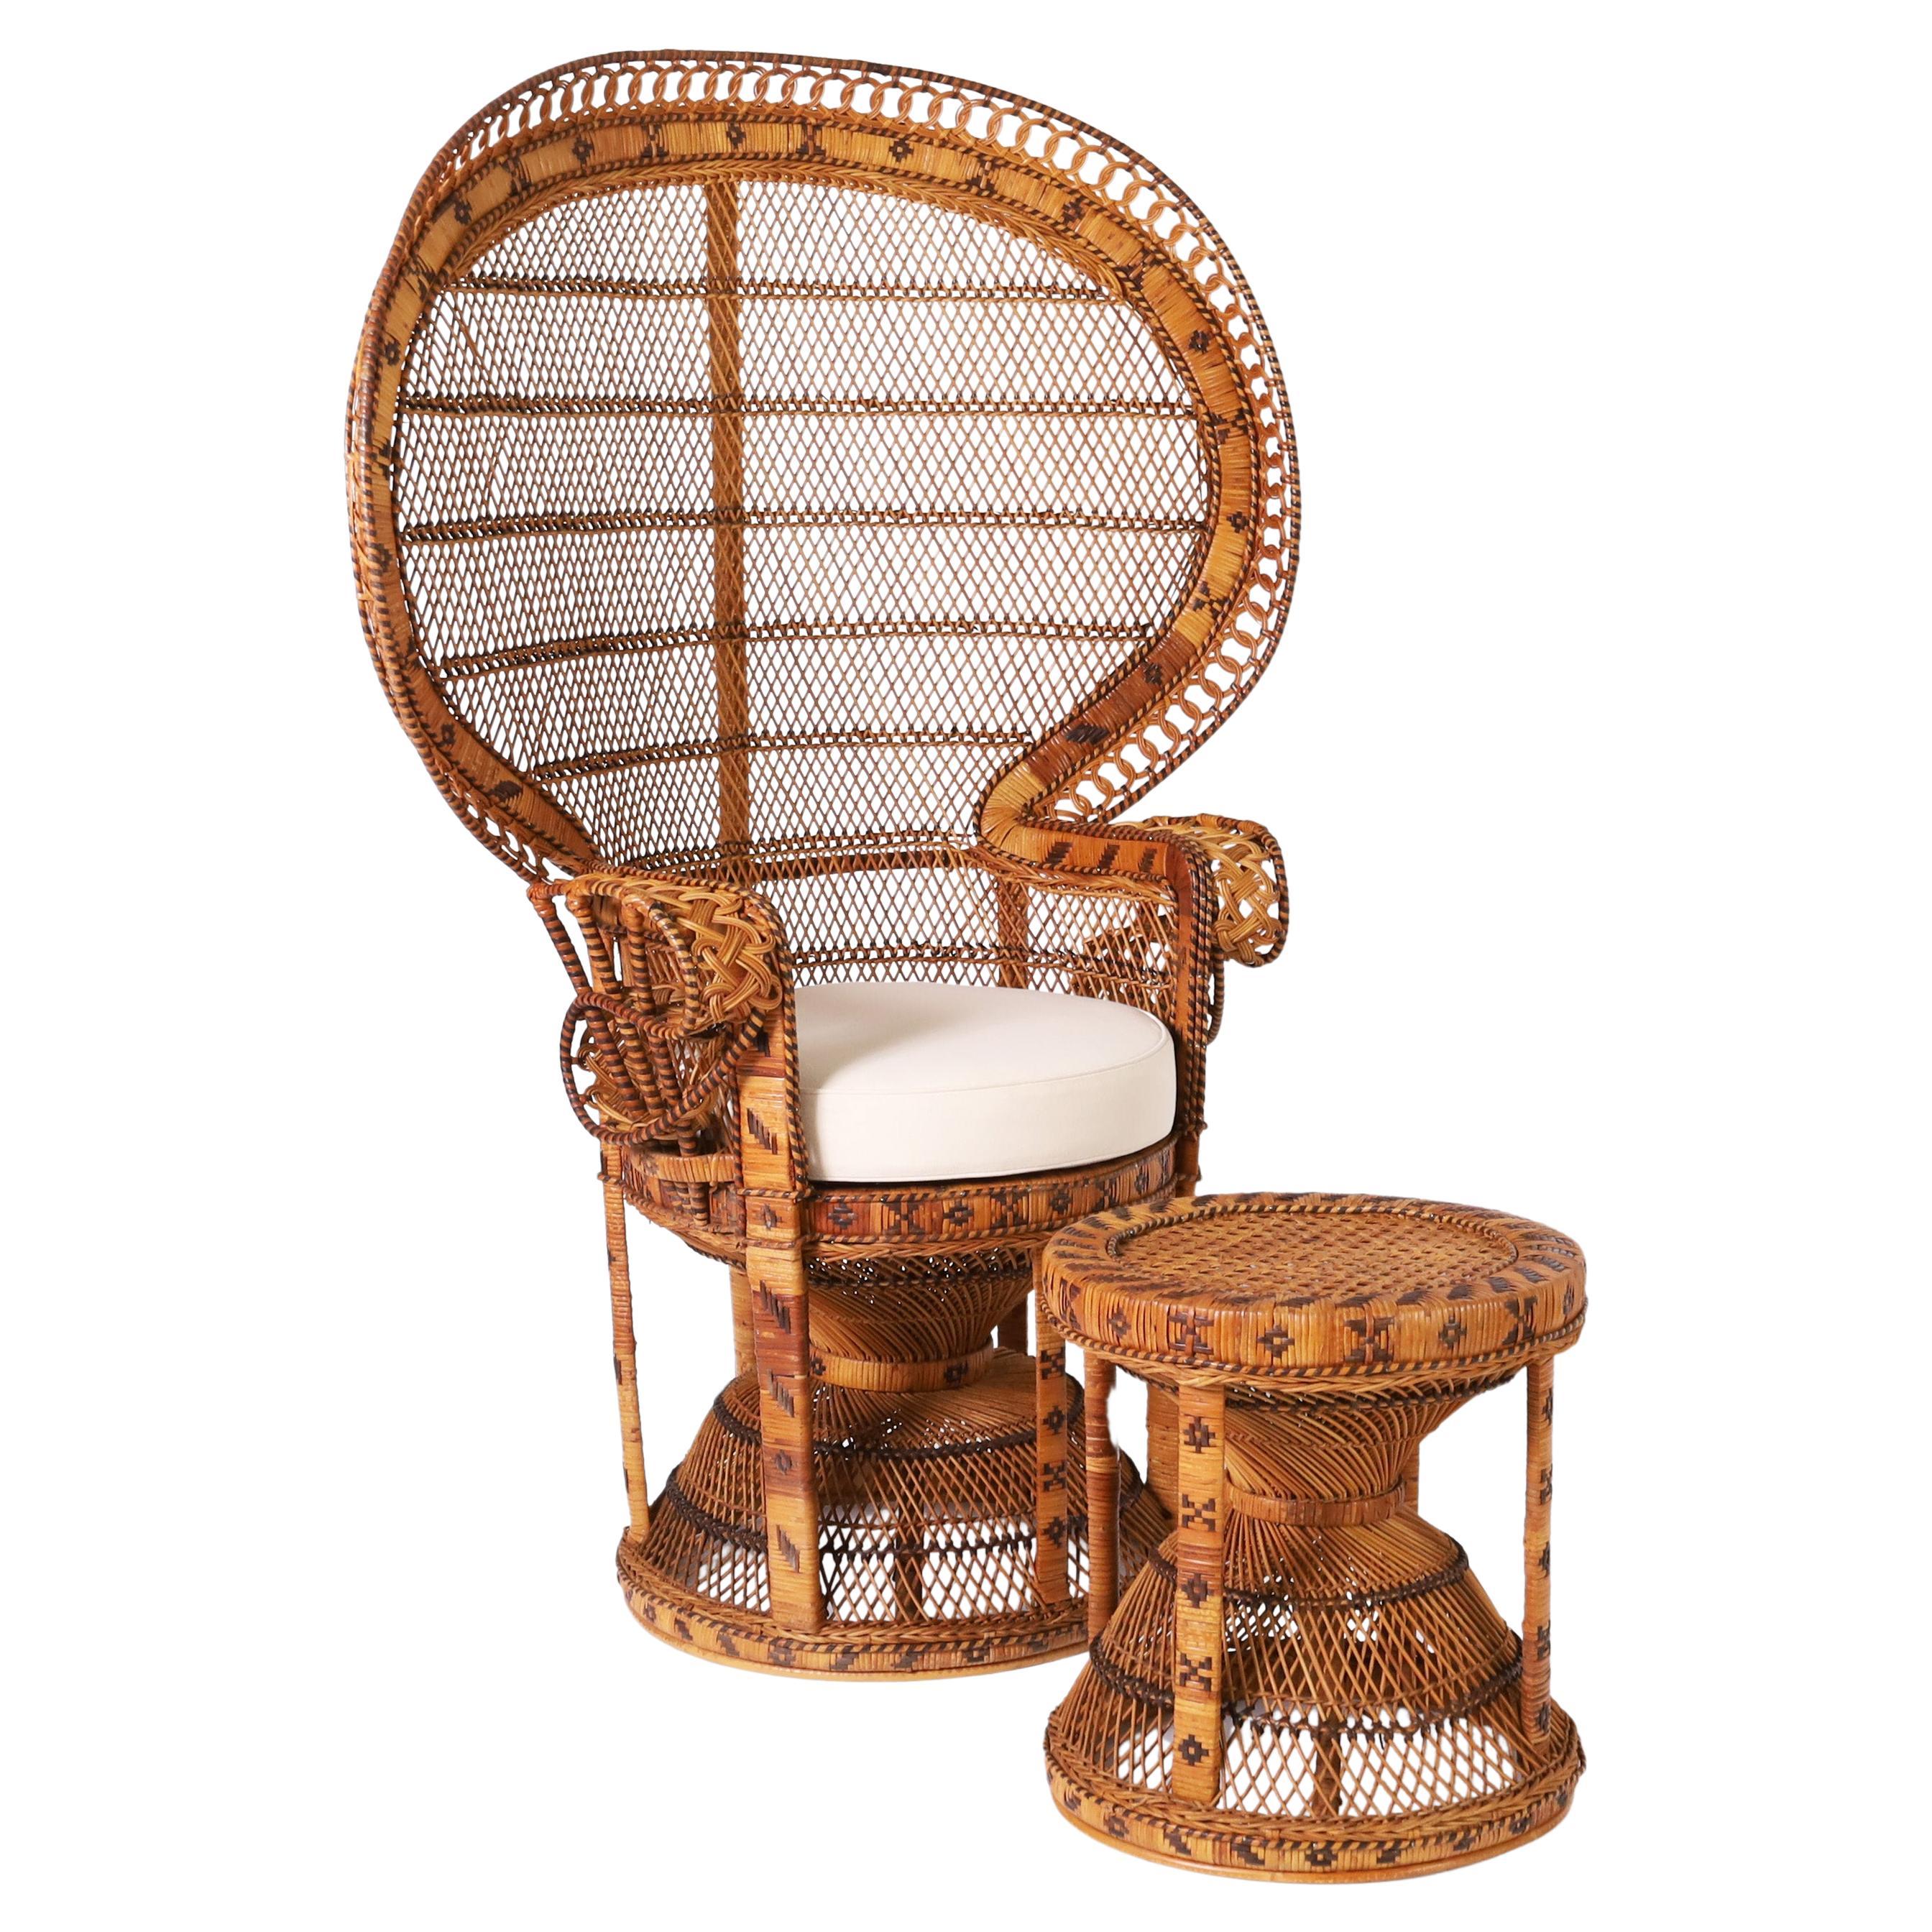 Chaise et pouf paon anglo-indienne en osier